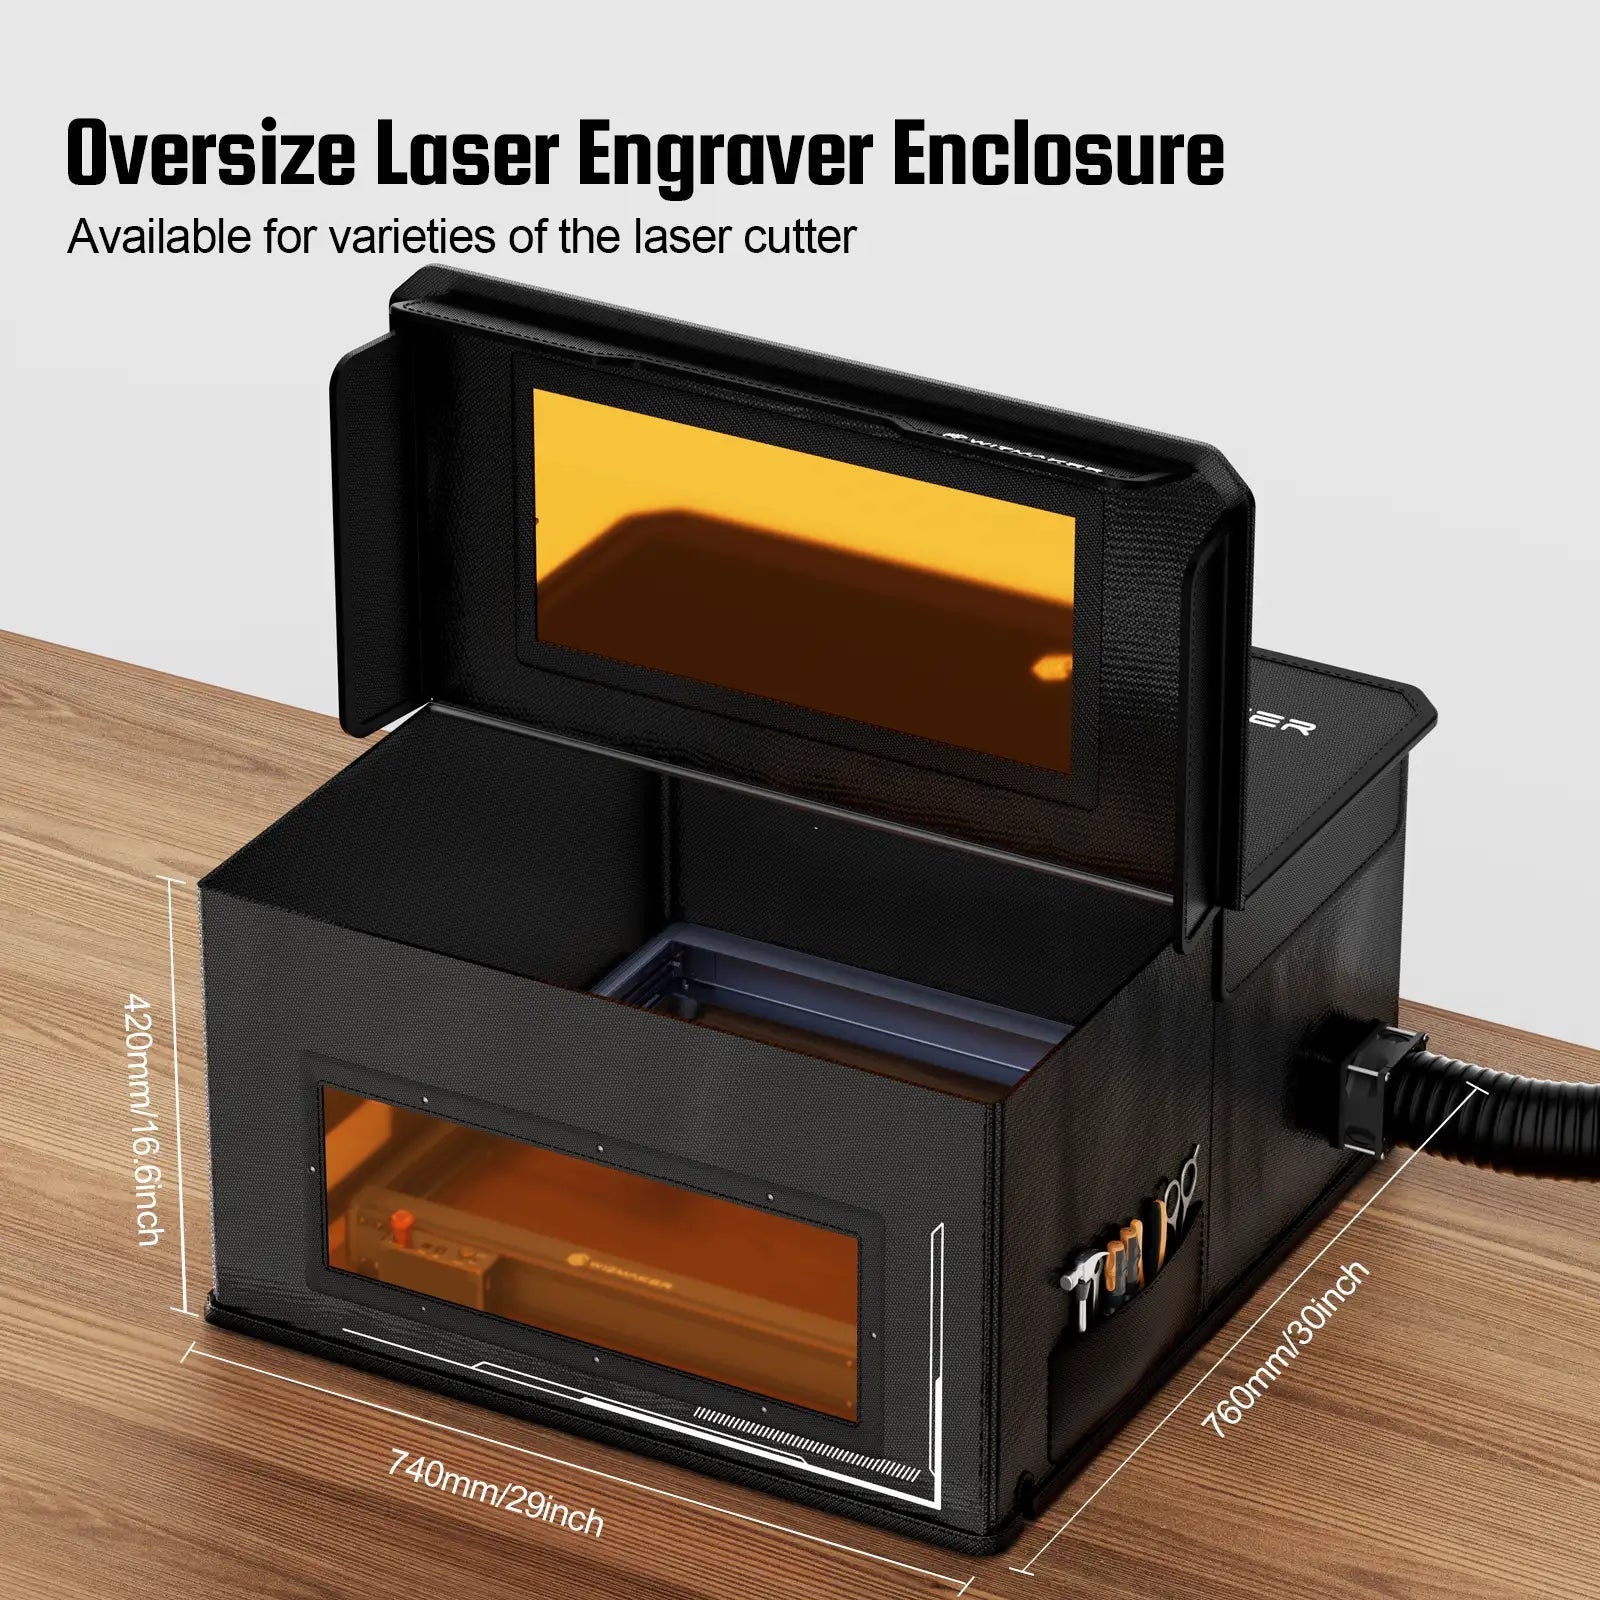 WIZMAKER Enclosure Foldable Dust-Proof Cover for All Laser Engravers